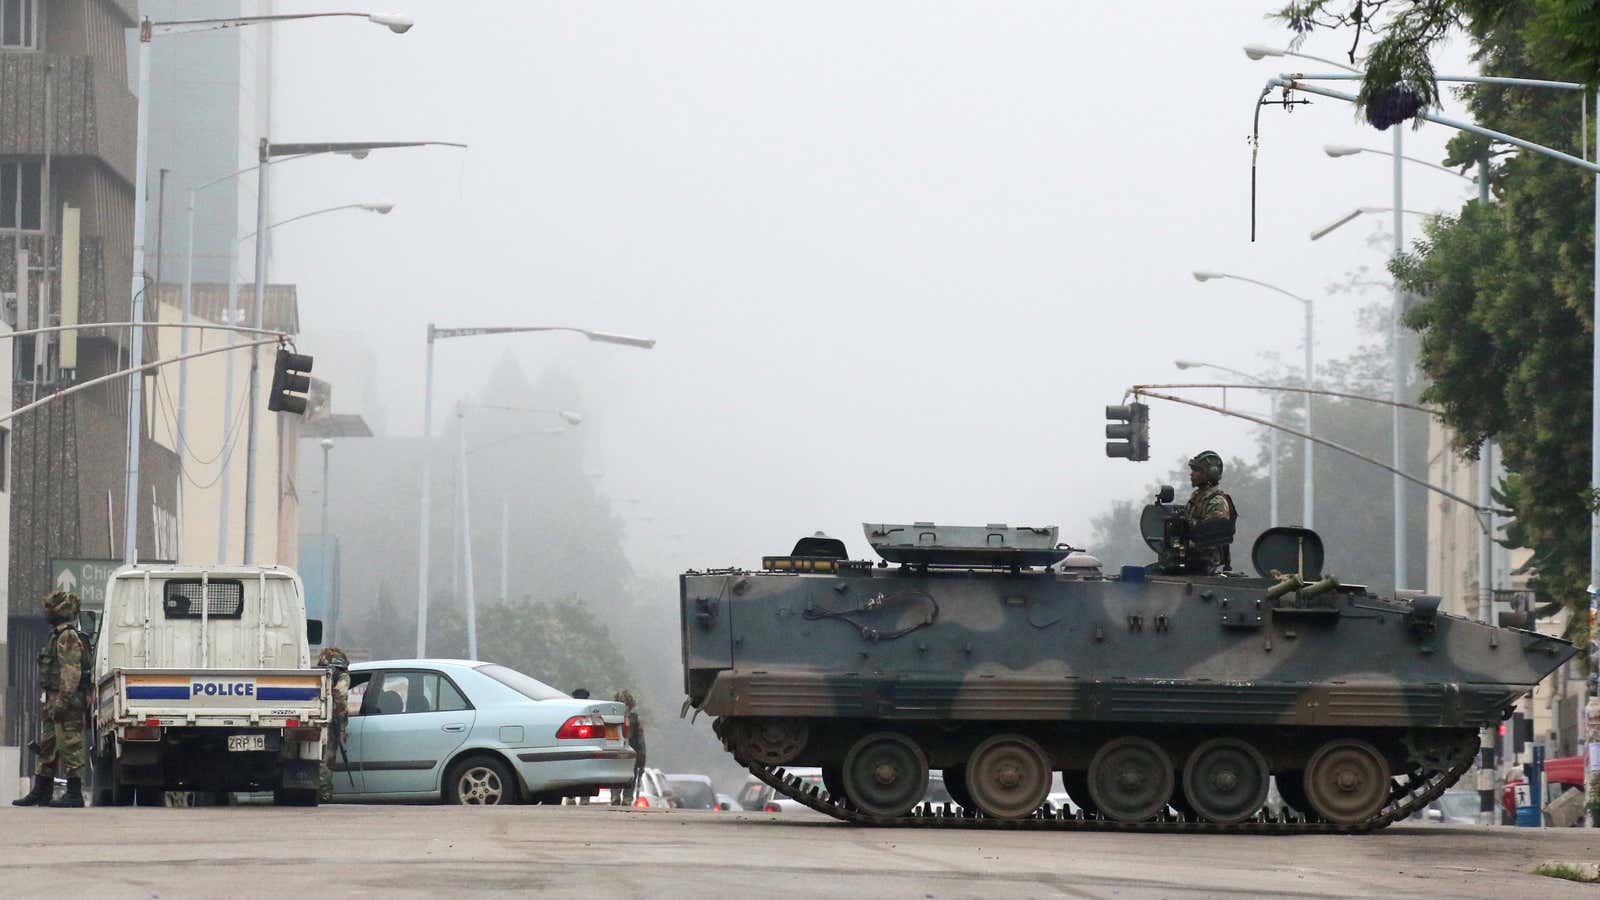 Military vehicles and soldiers patrol the streets in Harare, Zimbabwe Nov. 15.